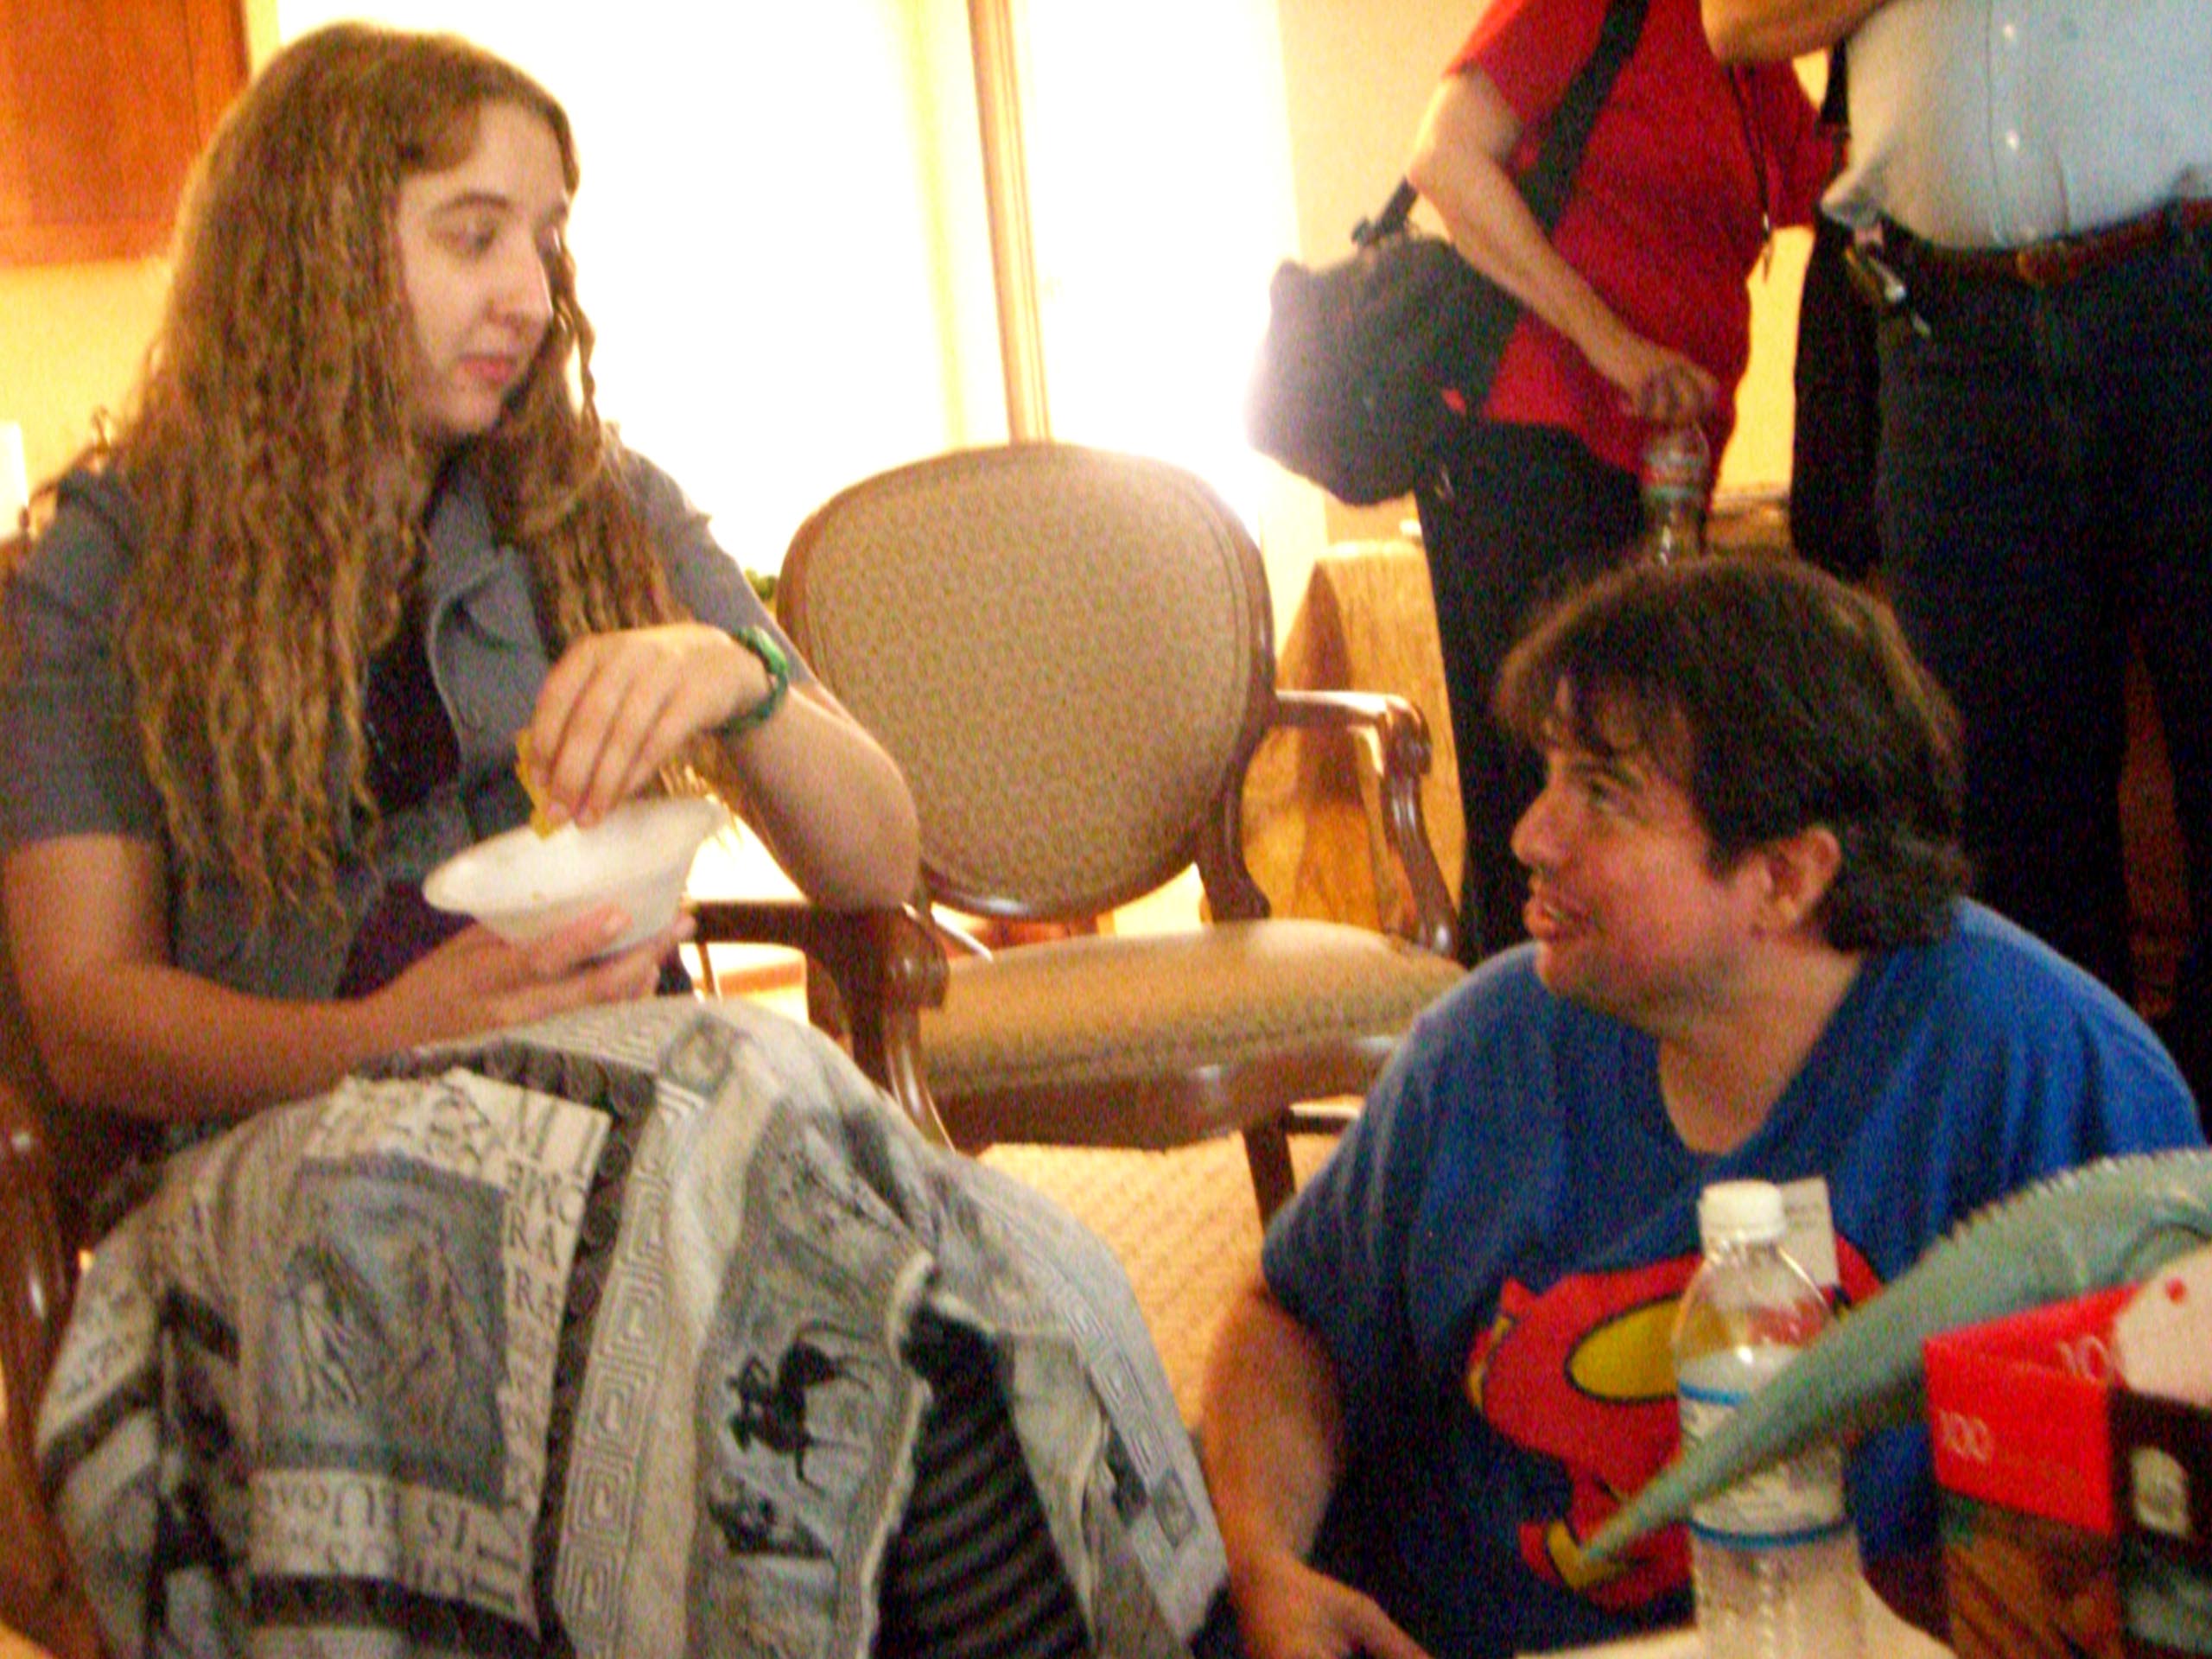 An unidentified congoer and author A. Lee Martinez (right) in the Consuite at ArmadilloCon 2007